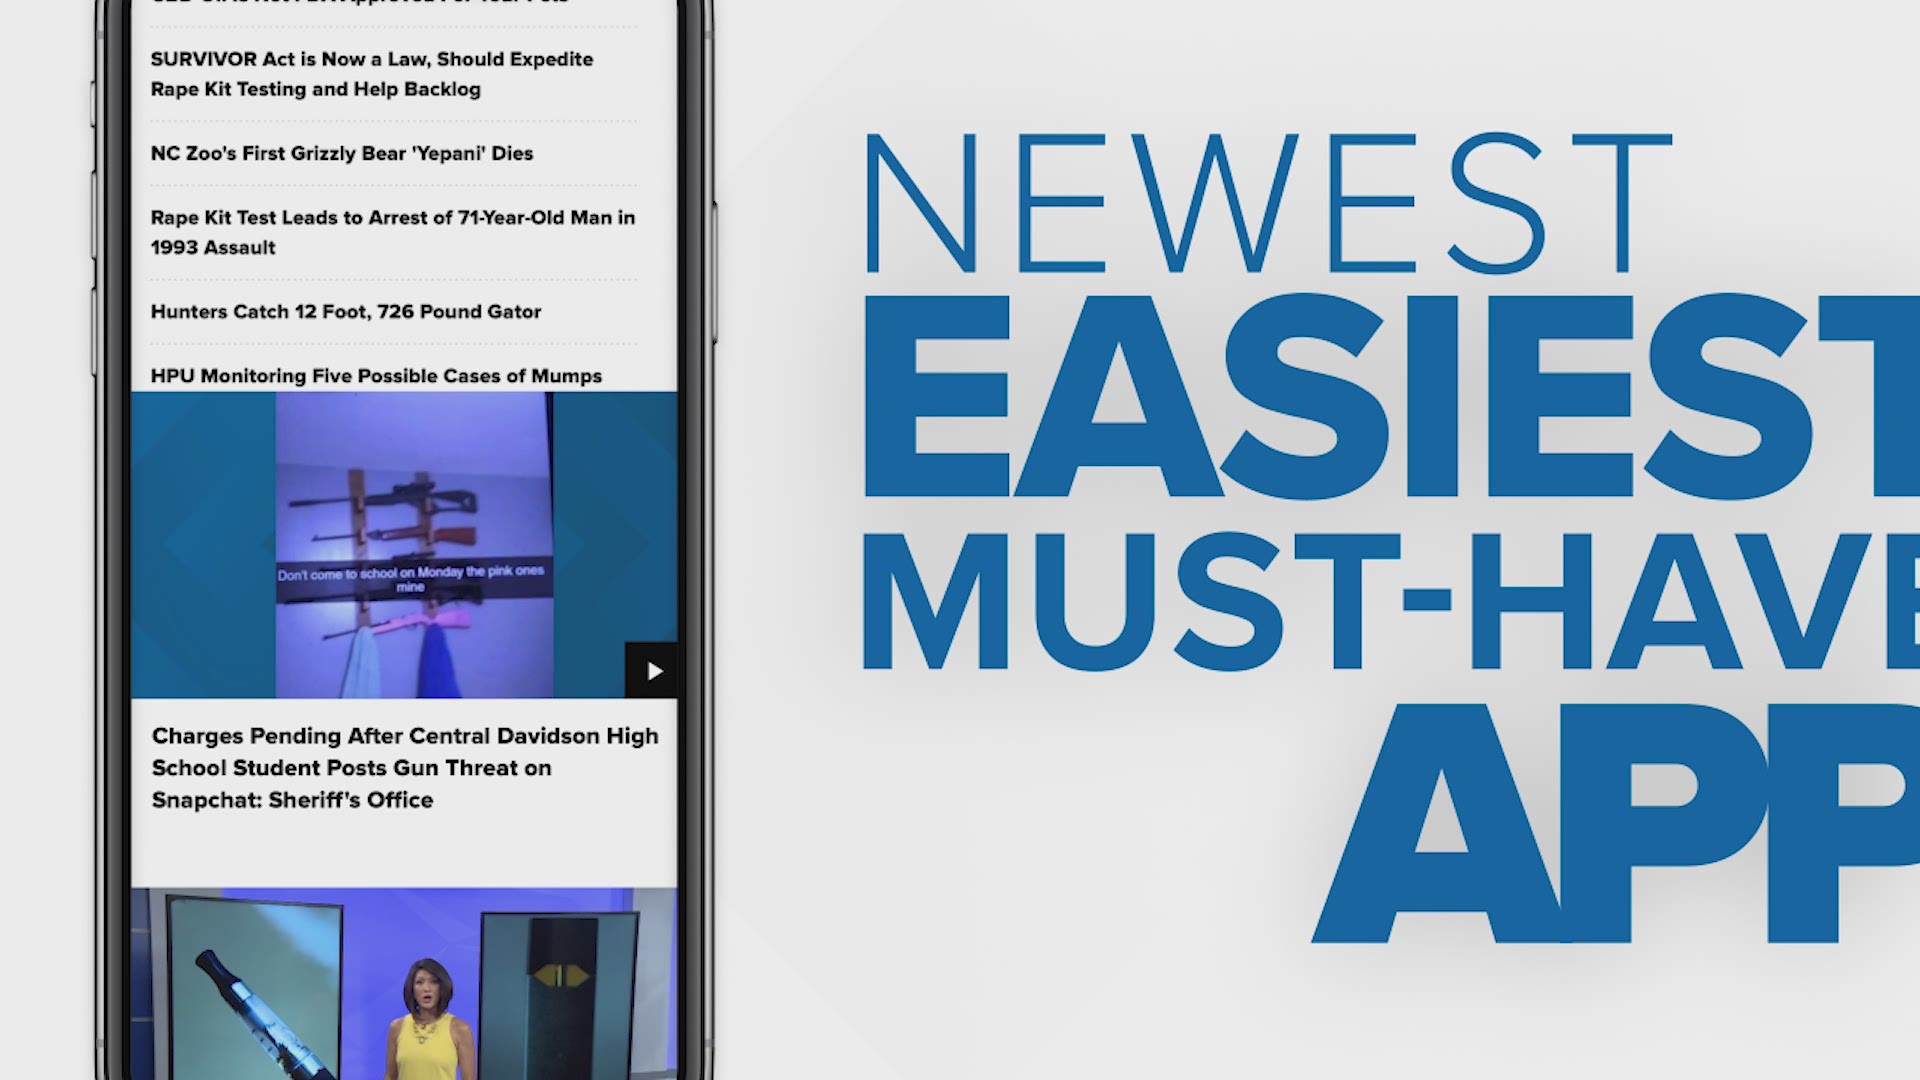 It's here, it's free and it's appalicious! We're talking about the new WFMY News 2 App.